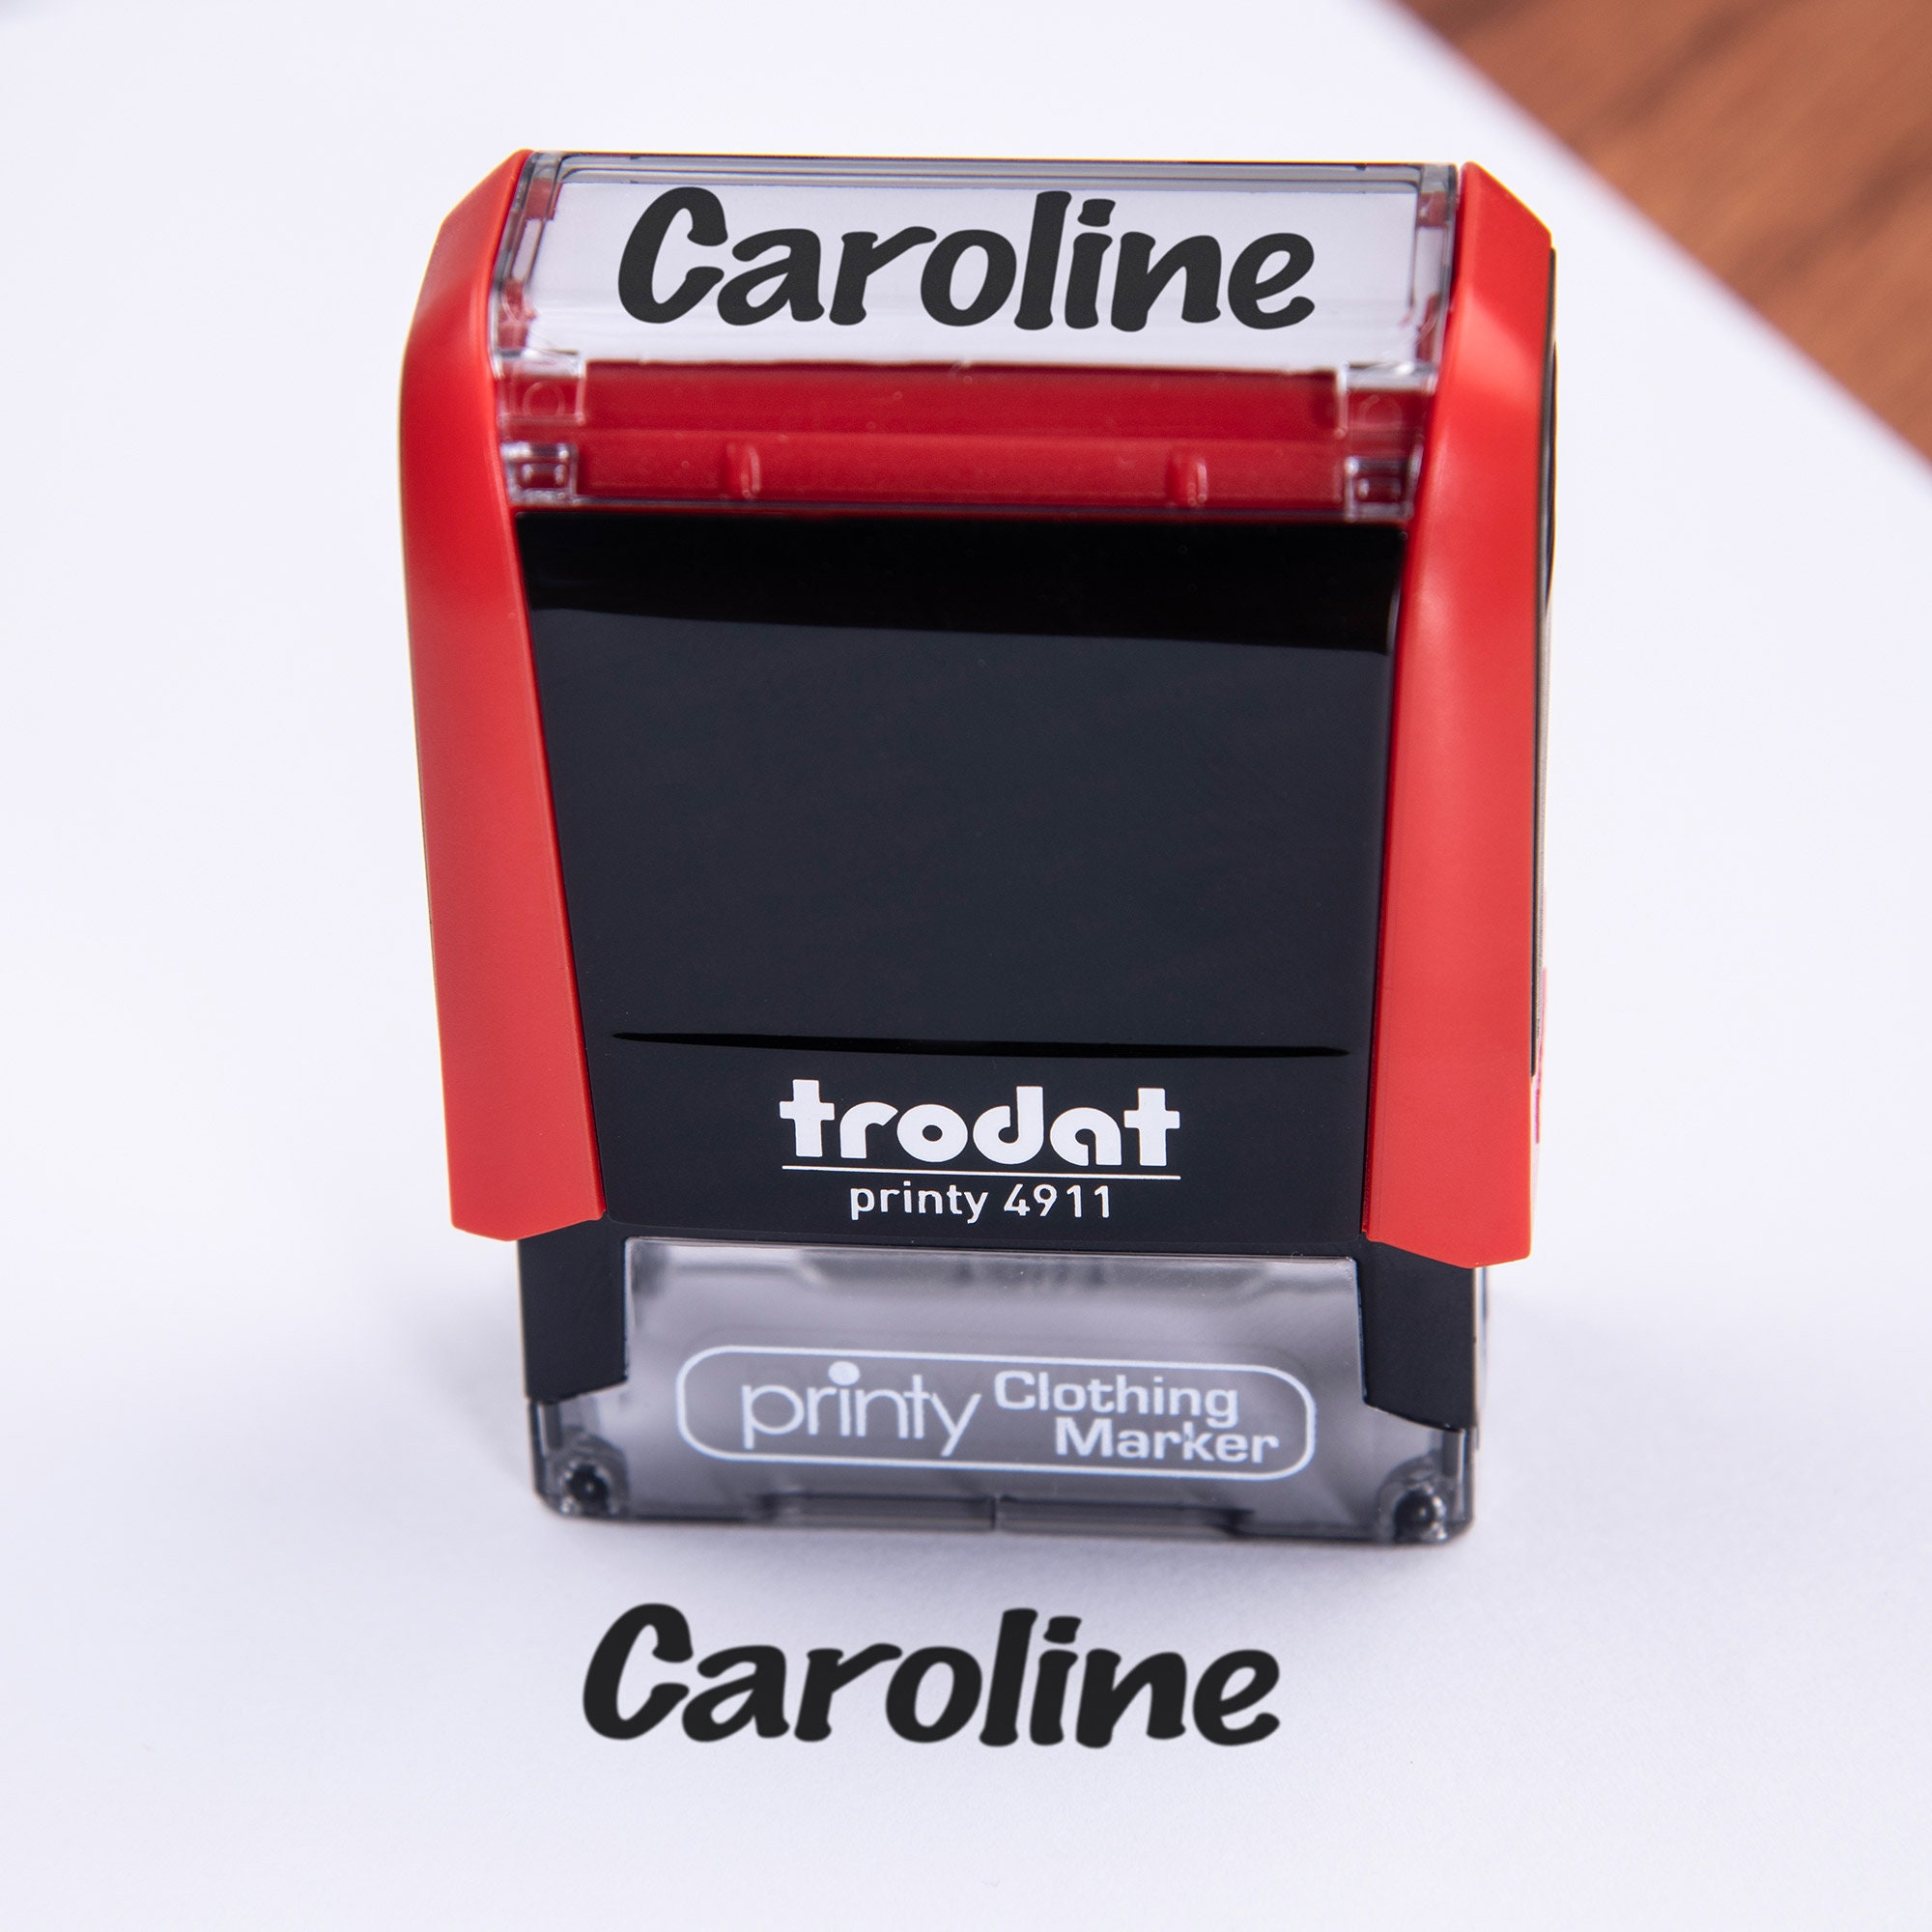 Custom Clothing Name Stamp for Kids Self Inking Fabric Rubber